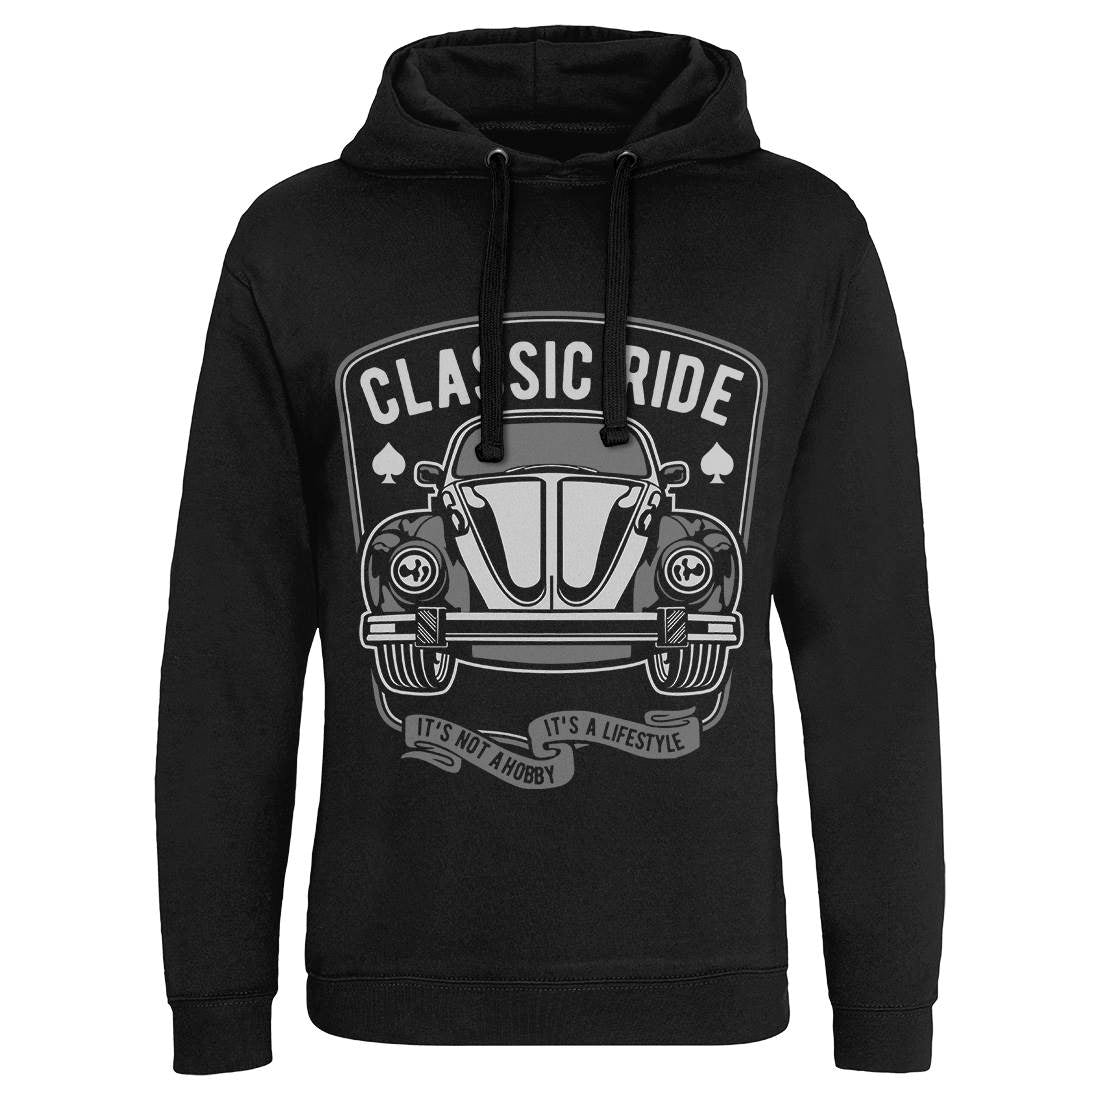 Classic Ride Mens Hoodie Without Pocket Cars B195